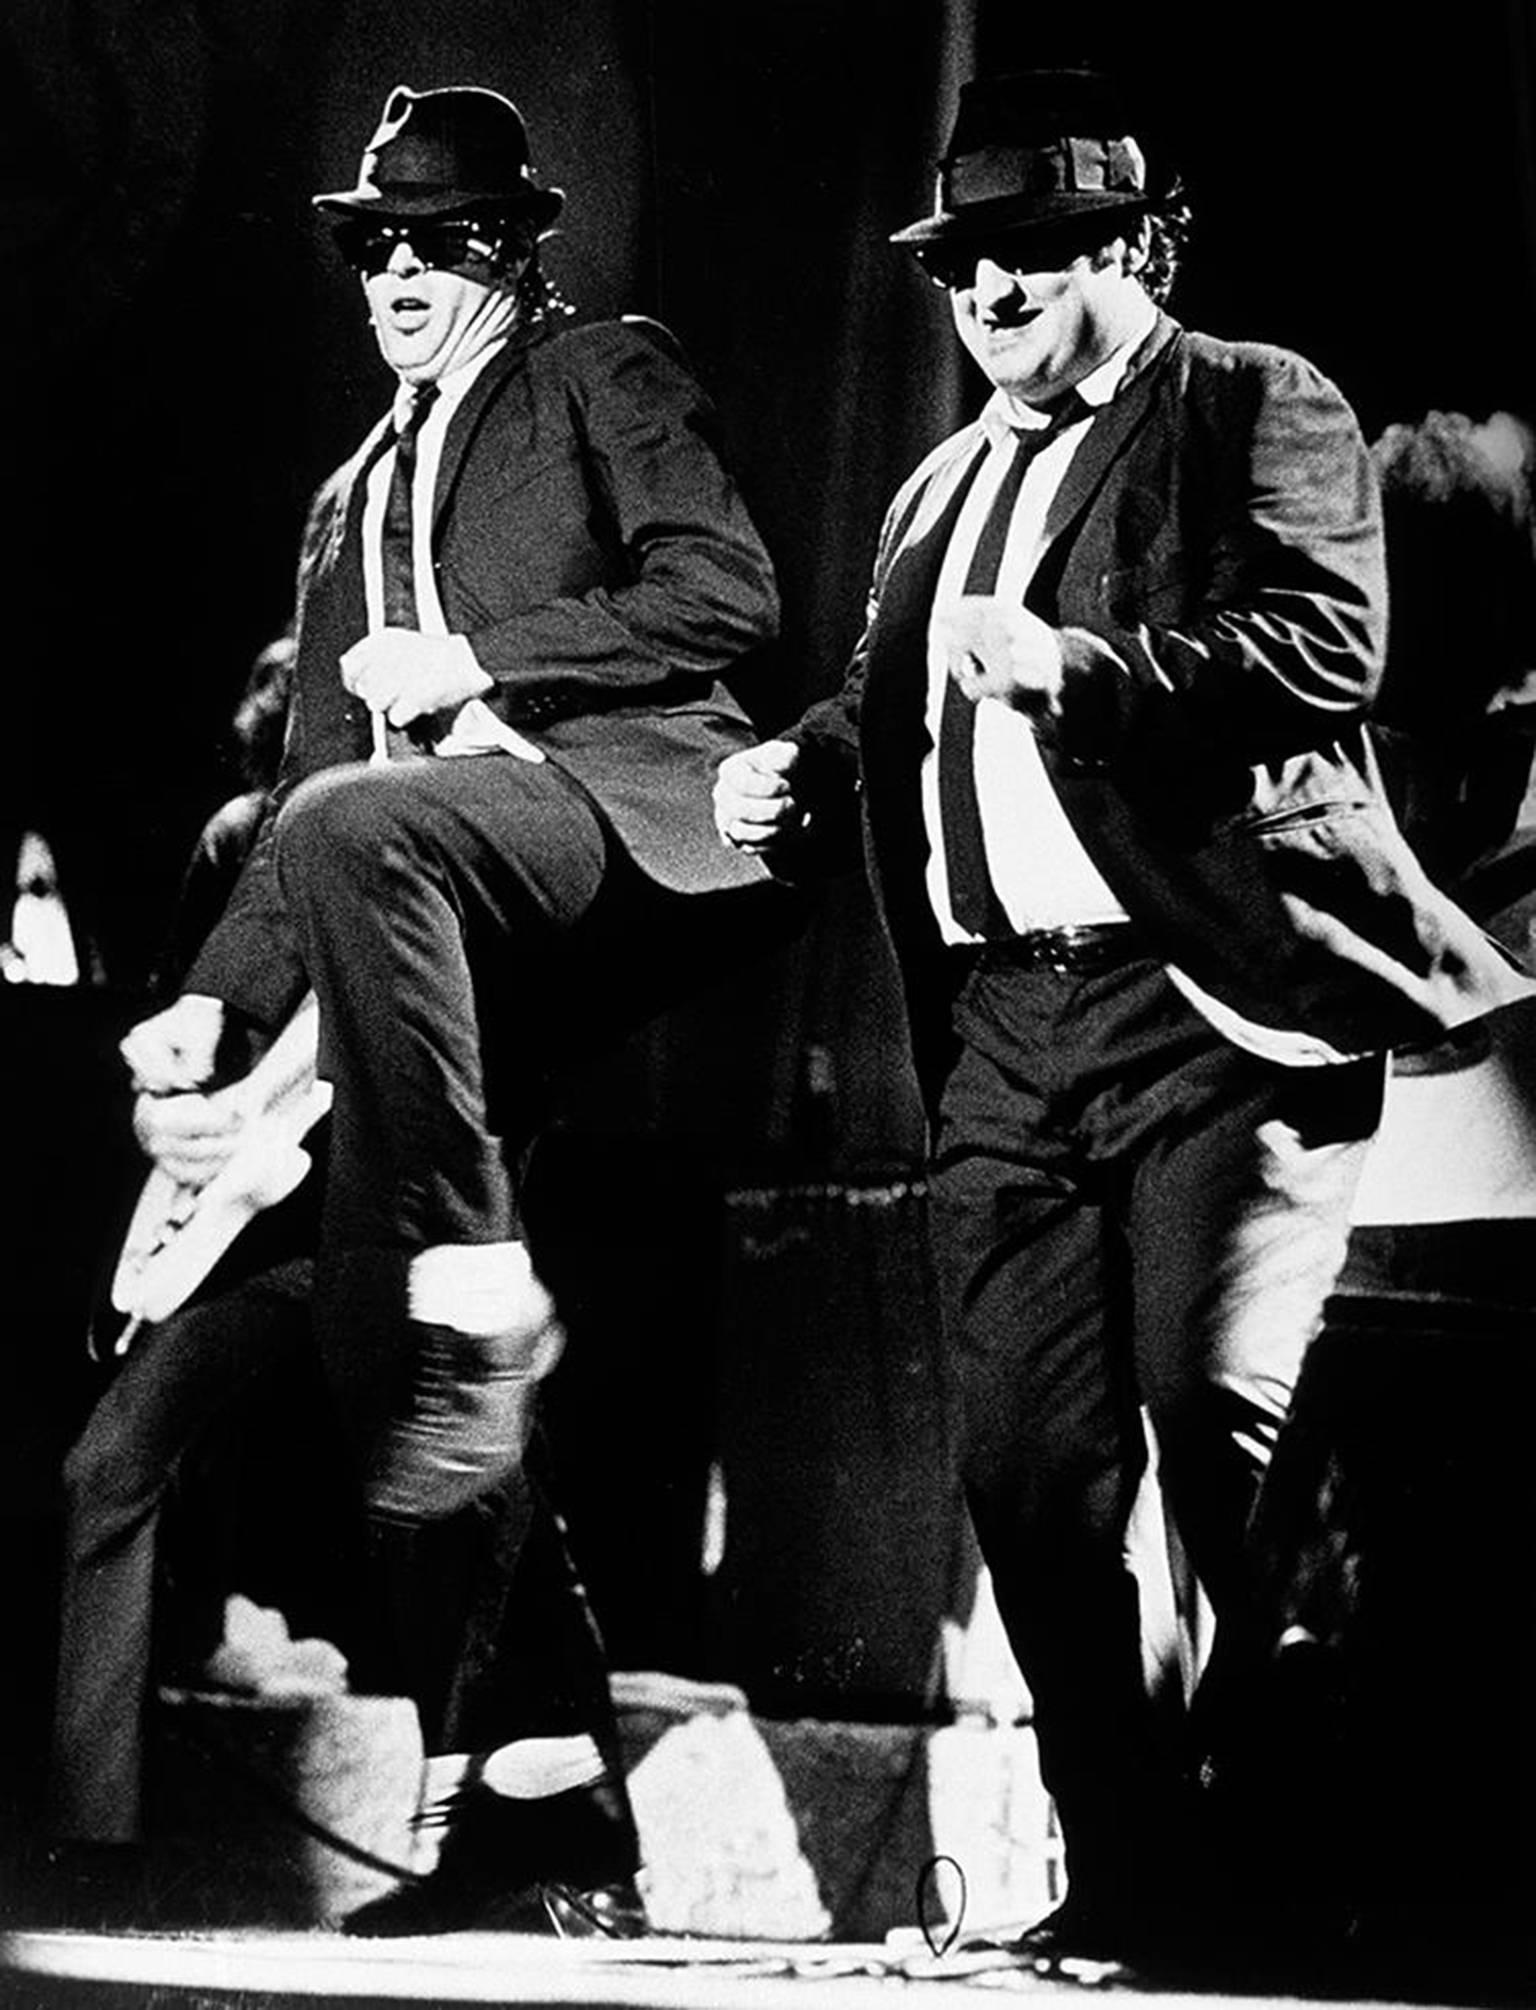 Jay Dickman Black and White Photograph - Jake and Elwood, the Blues Brothers in Dallas